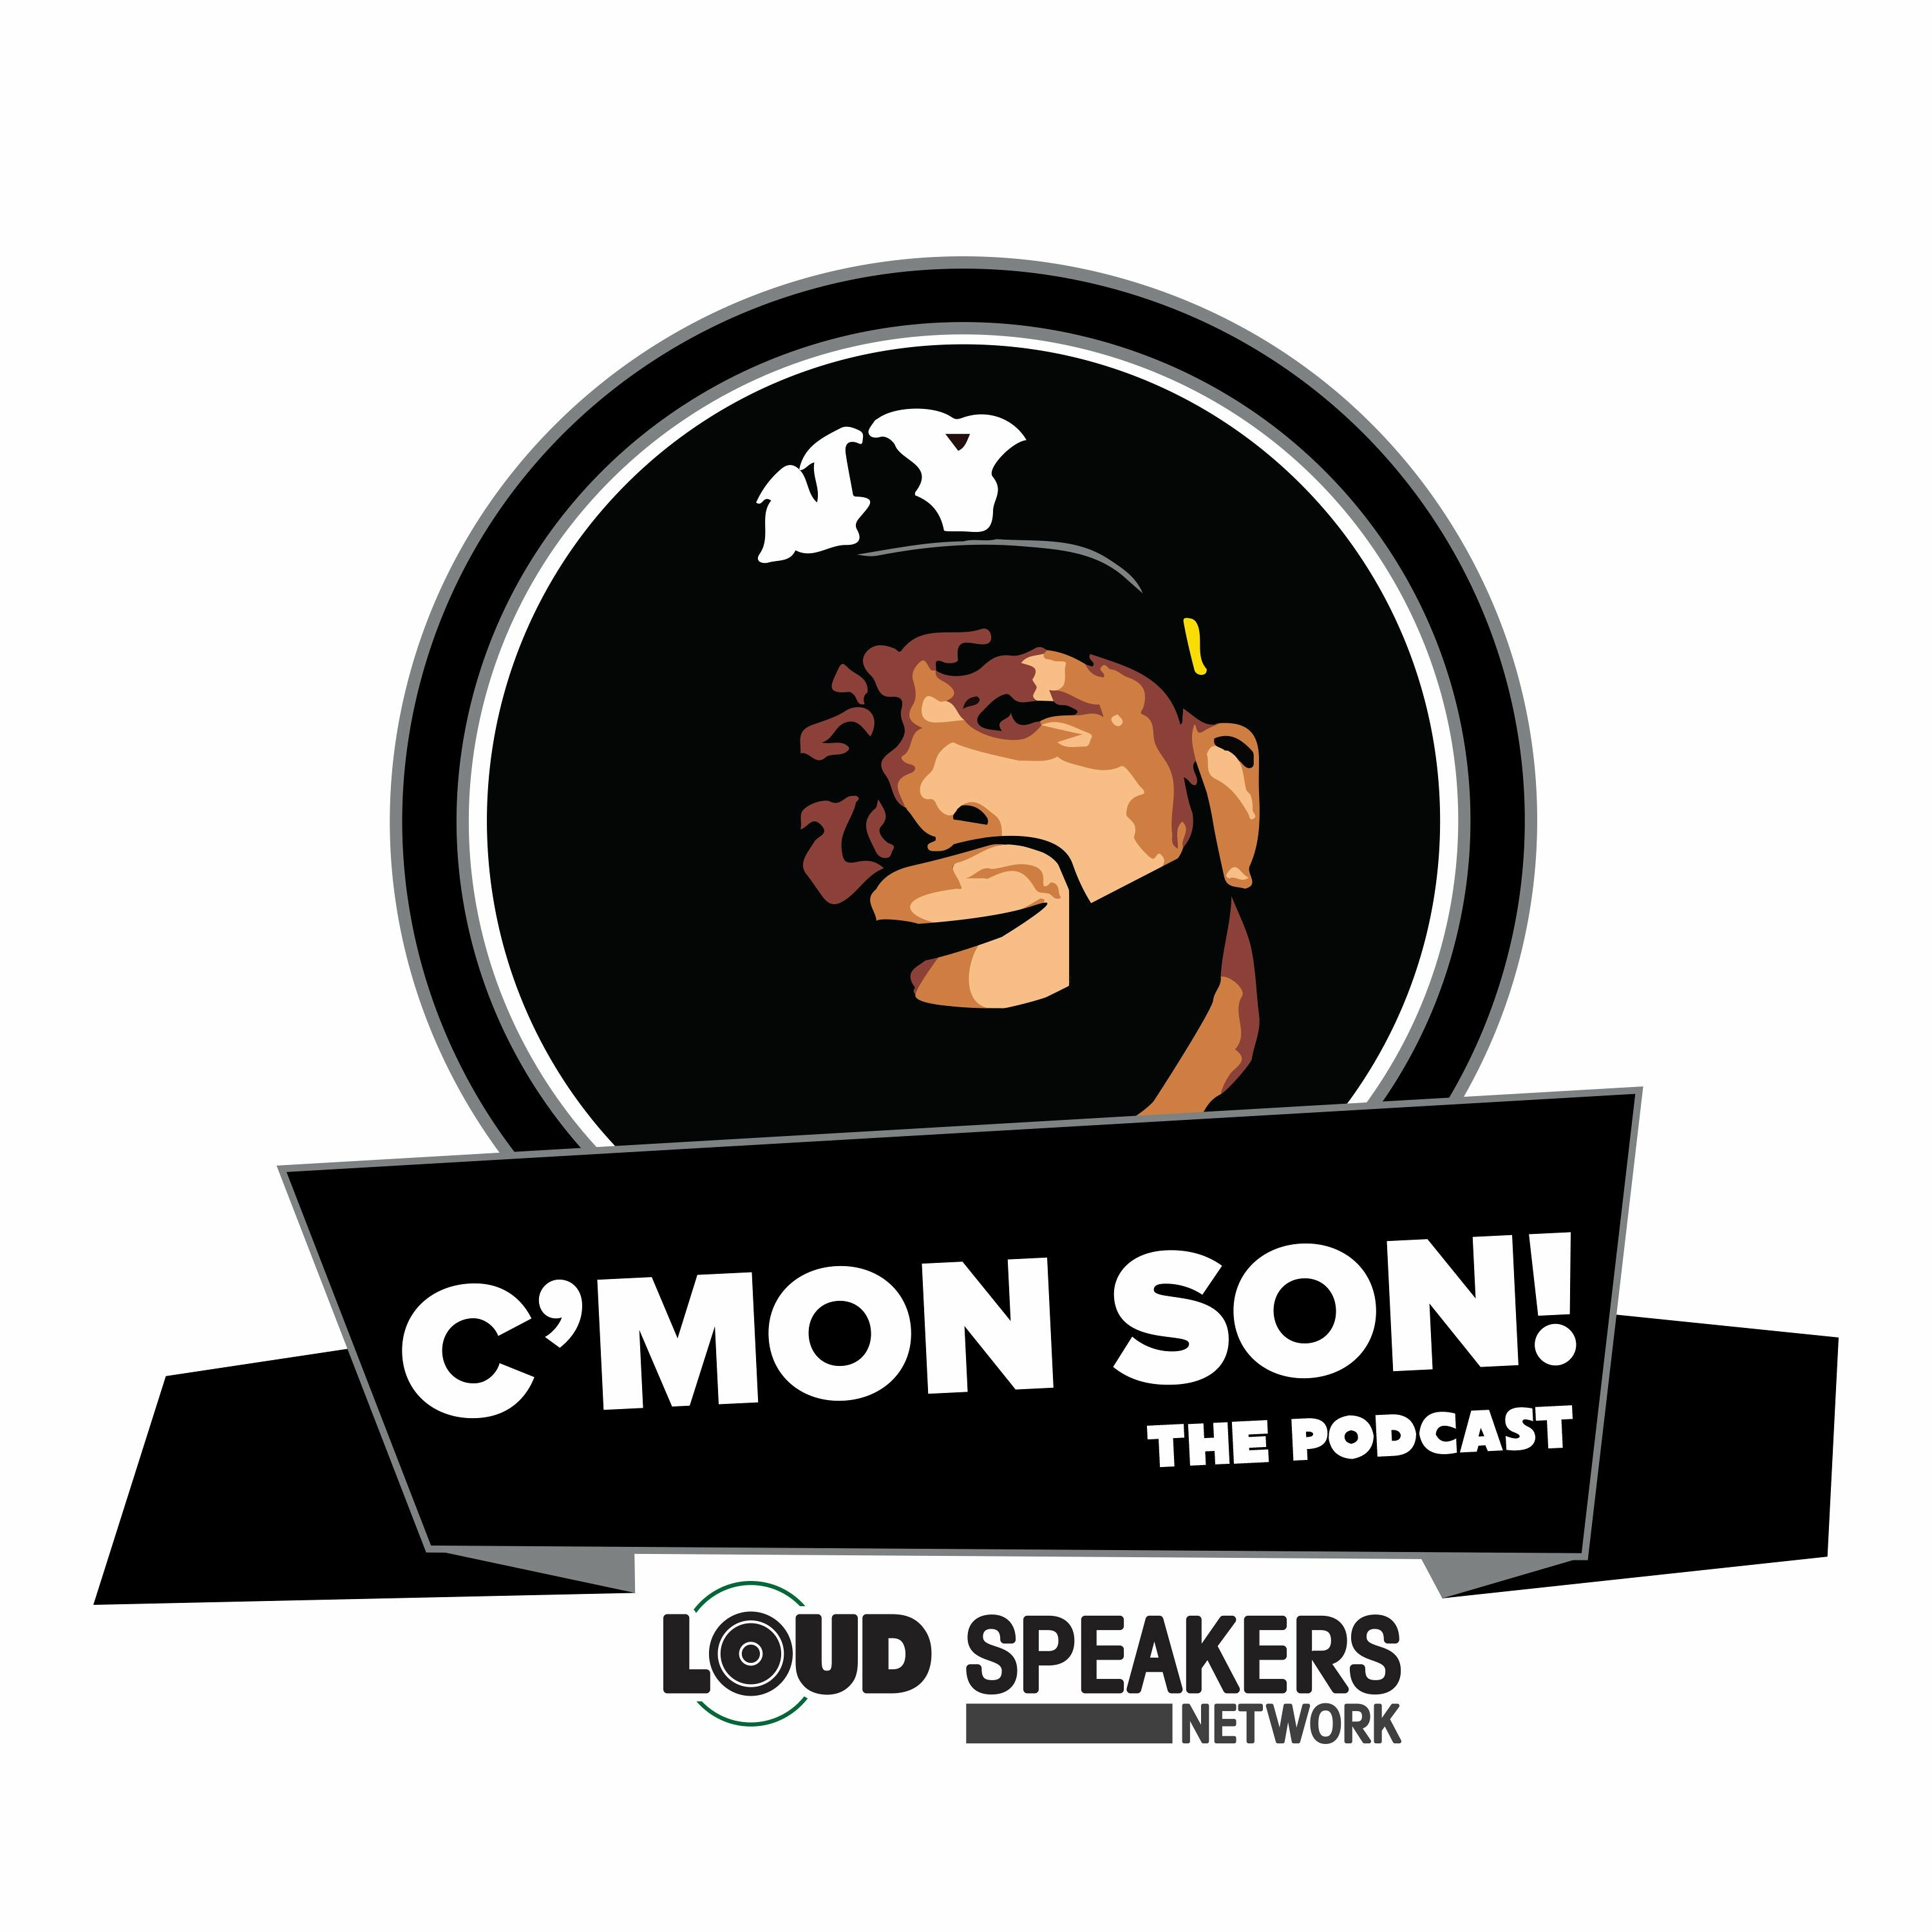 Ep. #196: C'mon Son! Year In Review 2021 Pt. 1